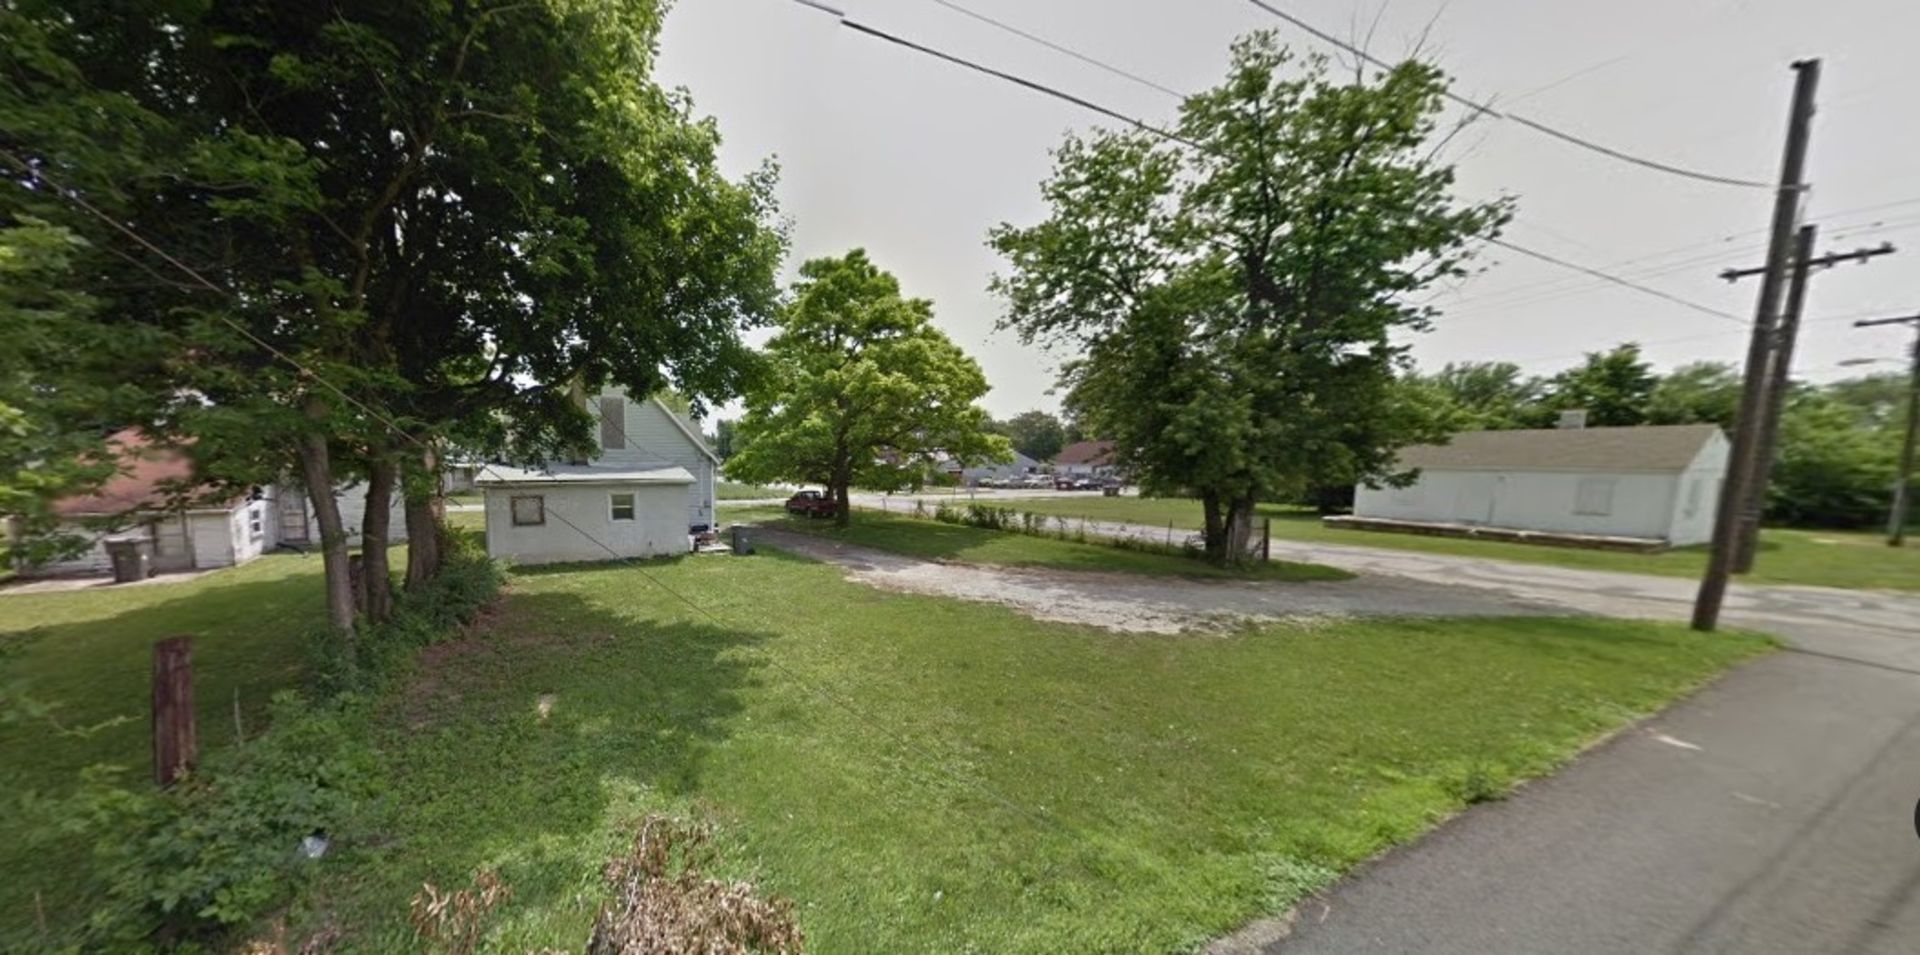 RESIDENTIAL LOT FOR SALE INDIANAPOLIS!!! - Image 6 of 12